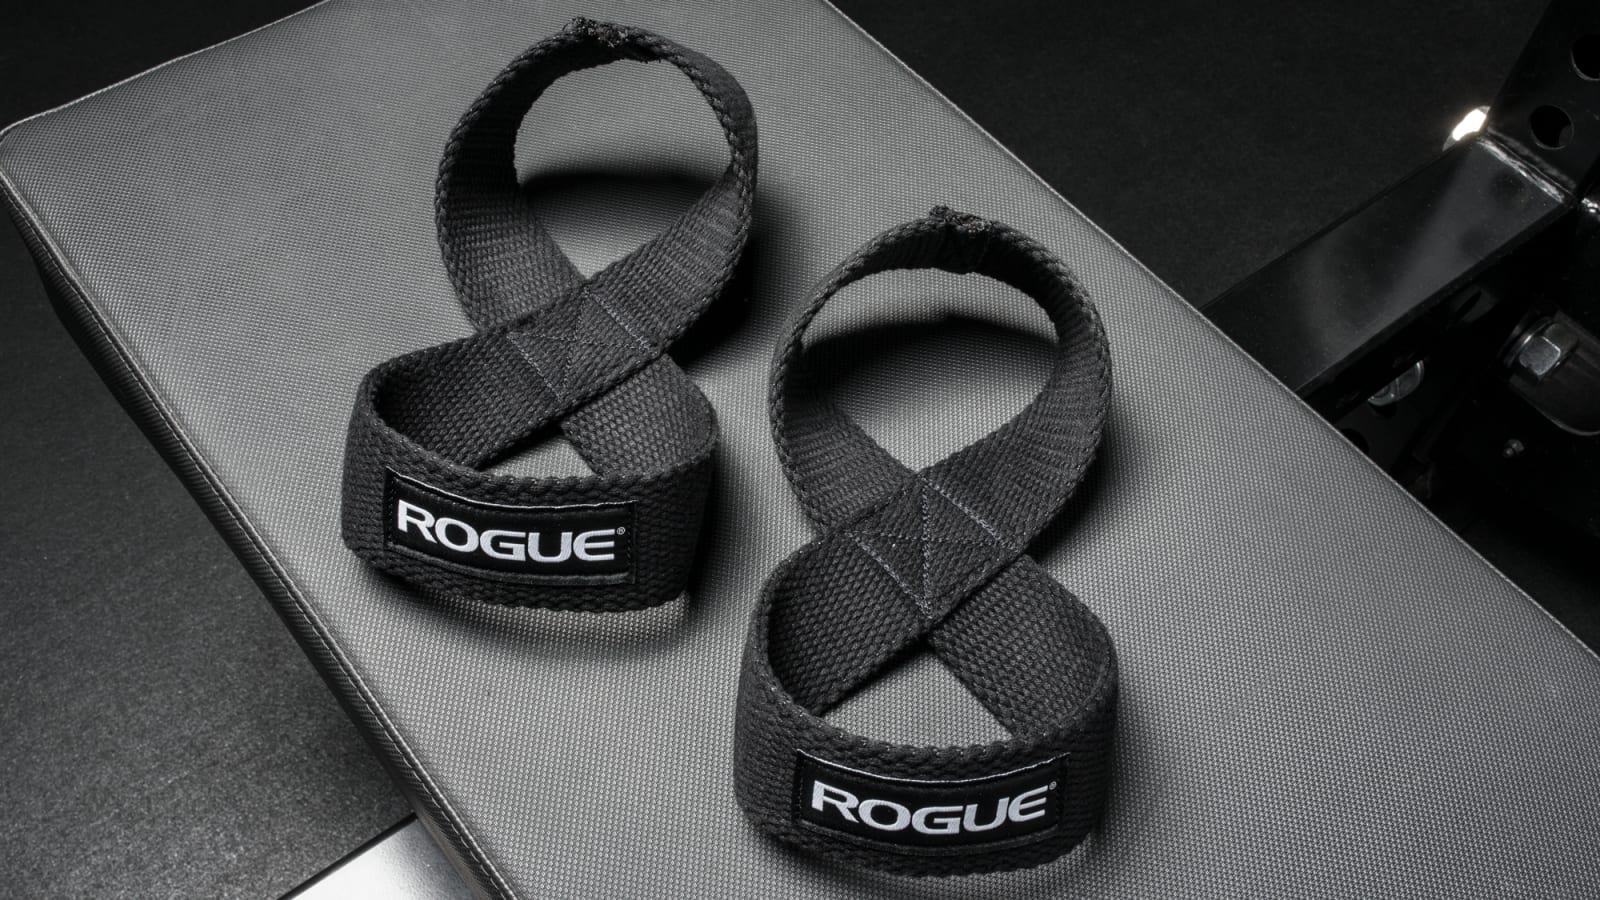 F2F FIGURE '8' TYPE LIFTING STRAPS 100% COTTON WITH NEOPRENE PADS FOR COMFORT 